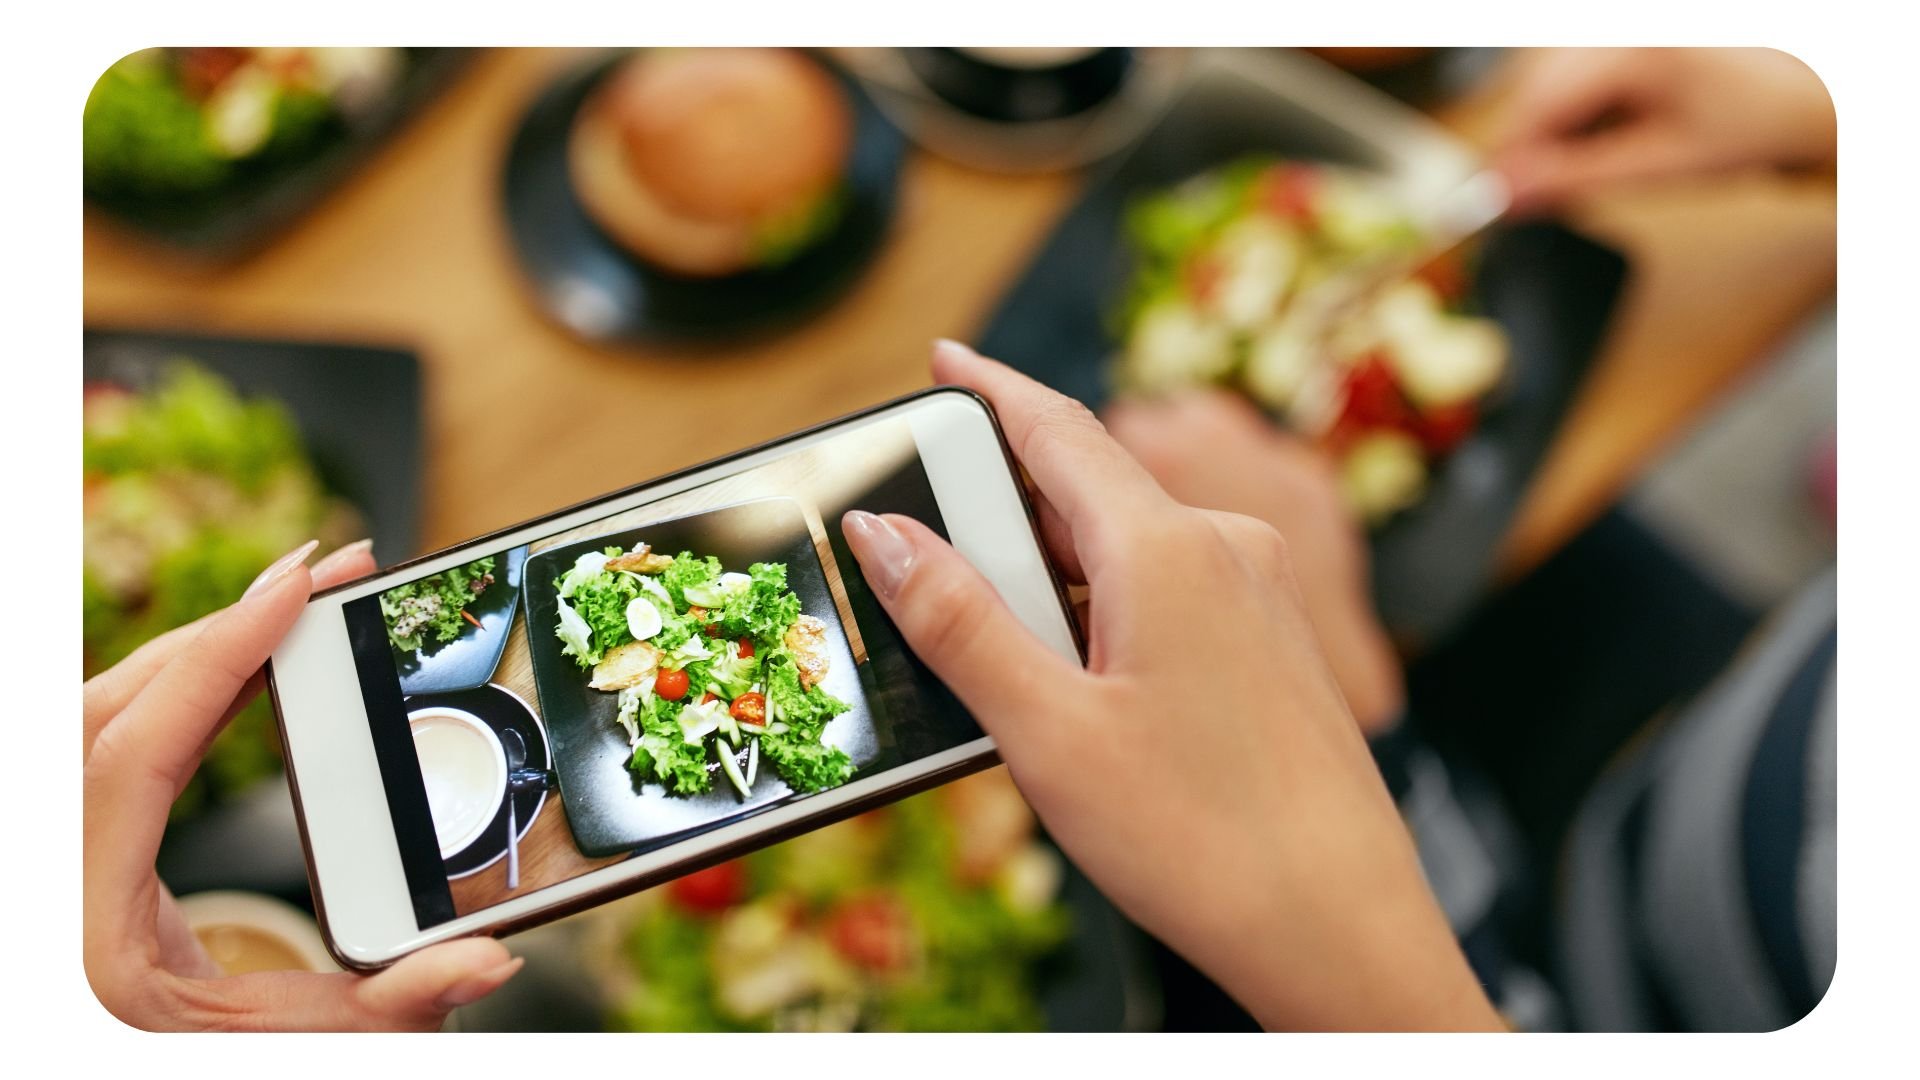 Woman using smartphone to take photo of food for social media